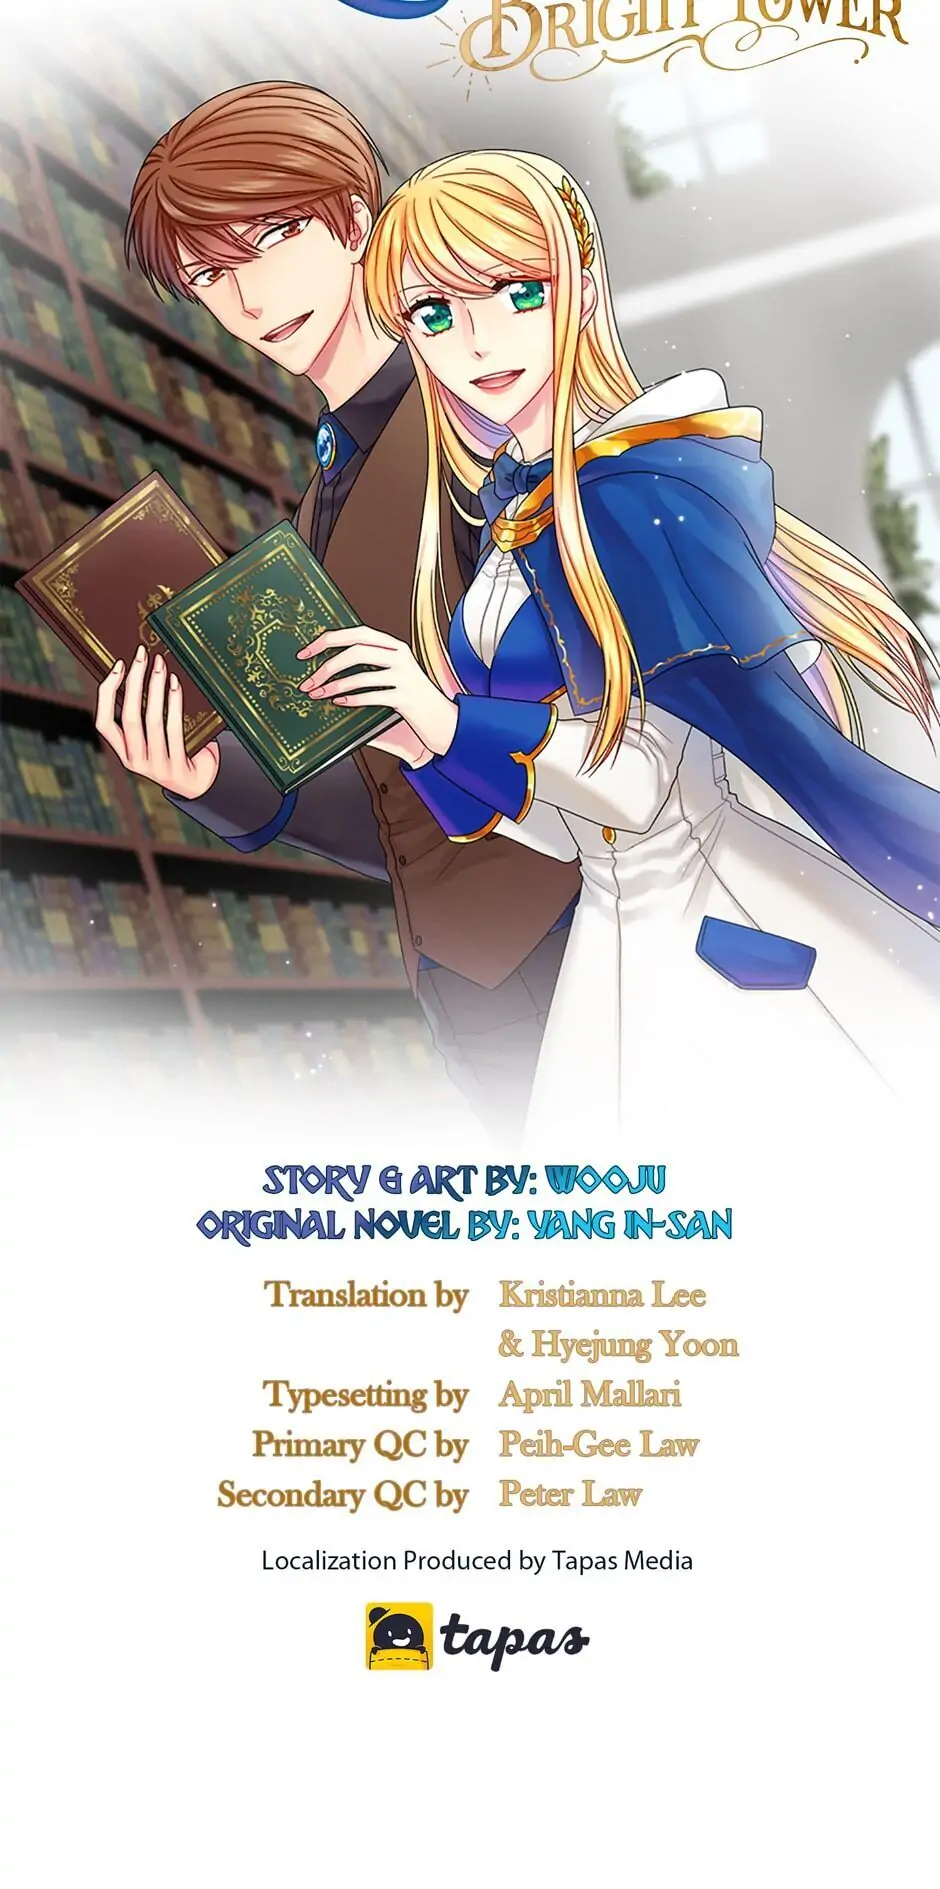 The Magic Tower Librarian chapter 58